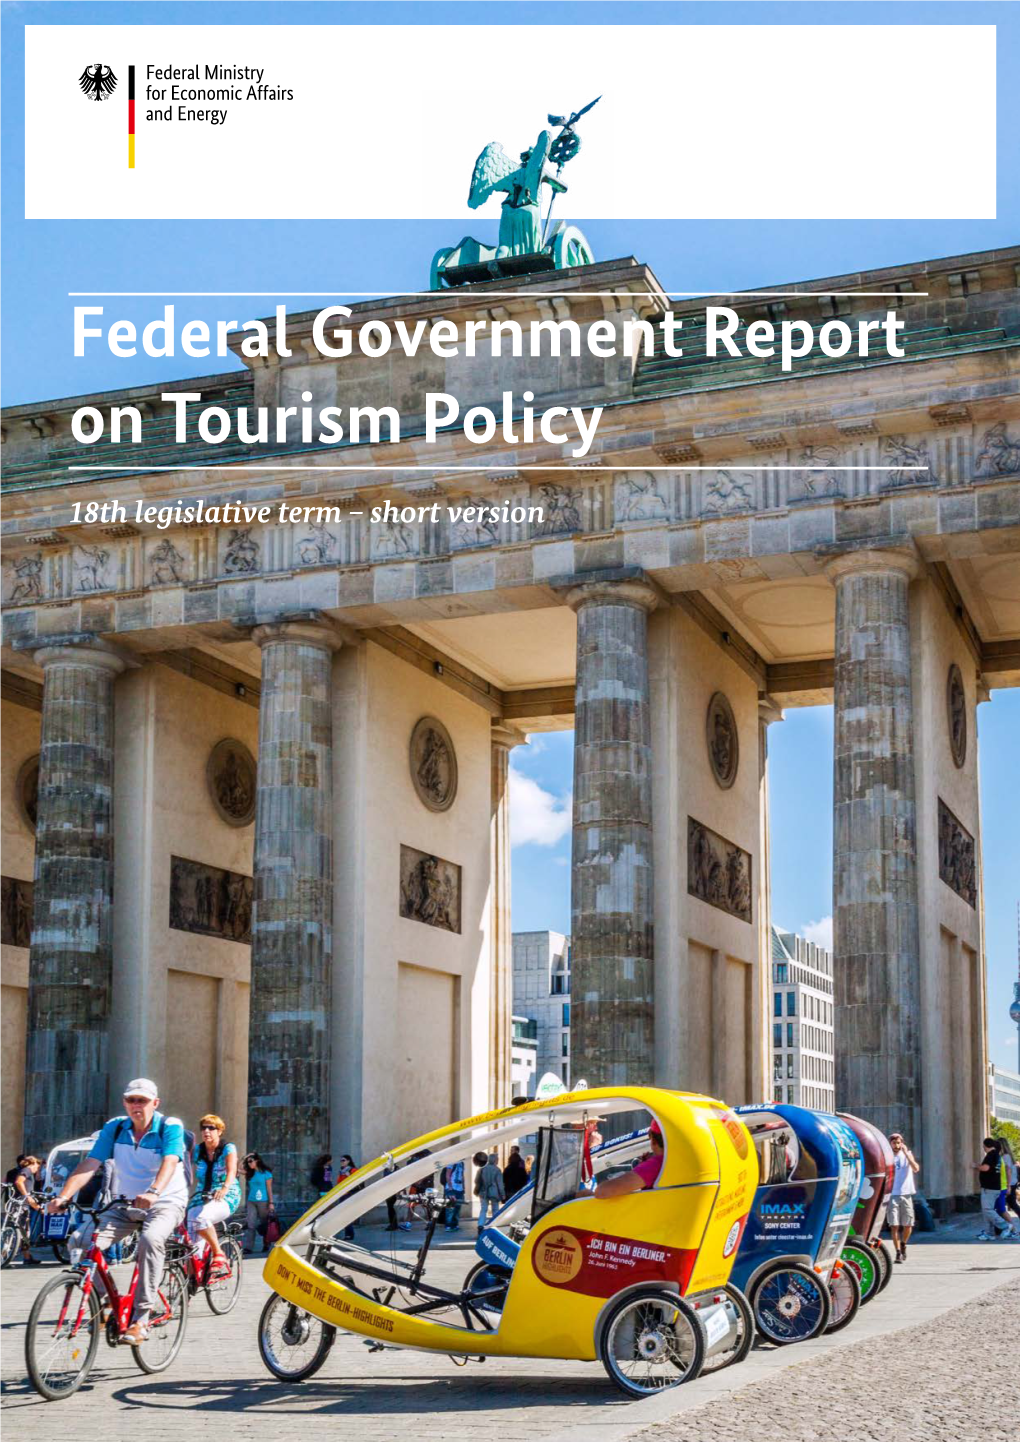 Federal Government Report on Tourism Policy